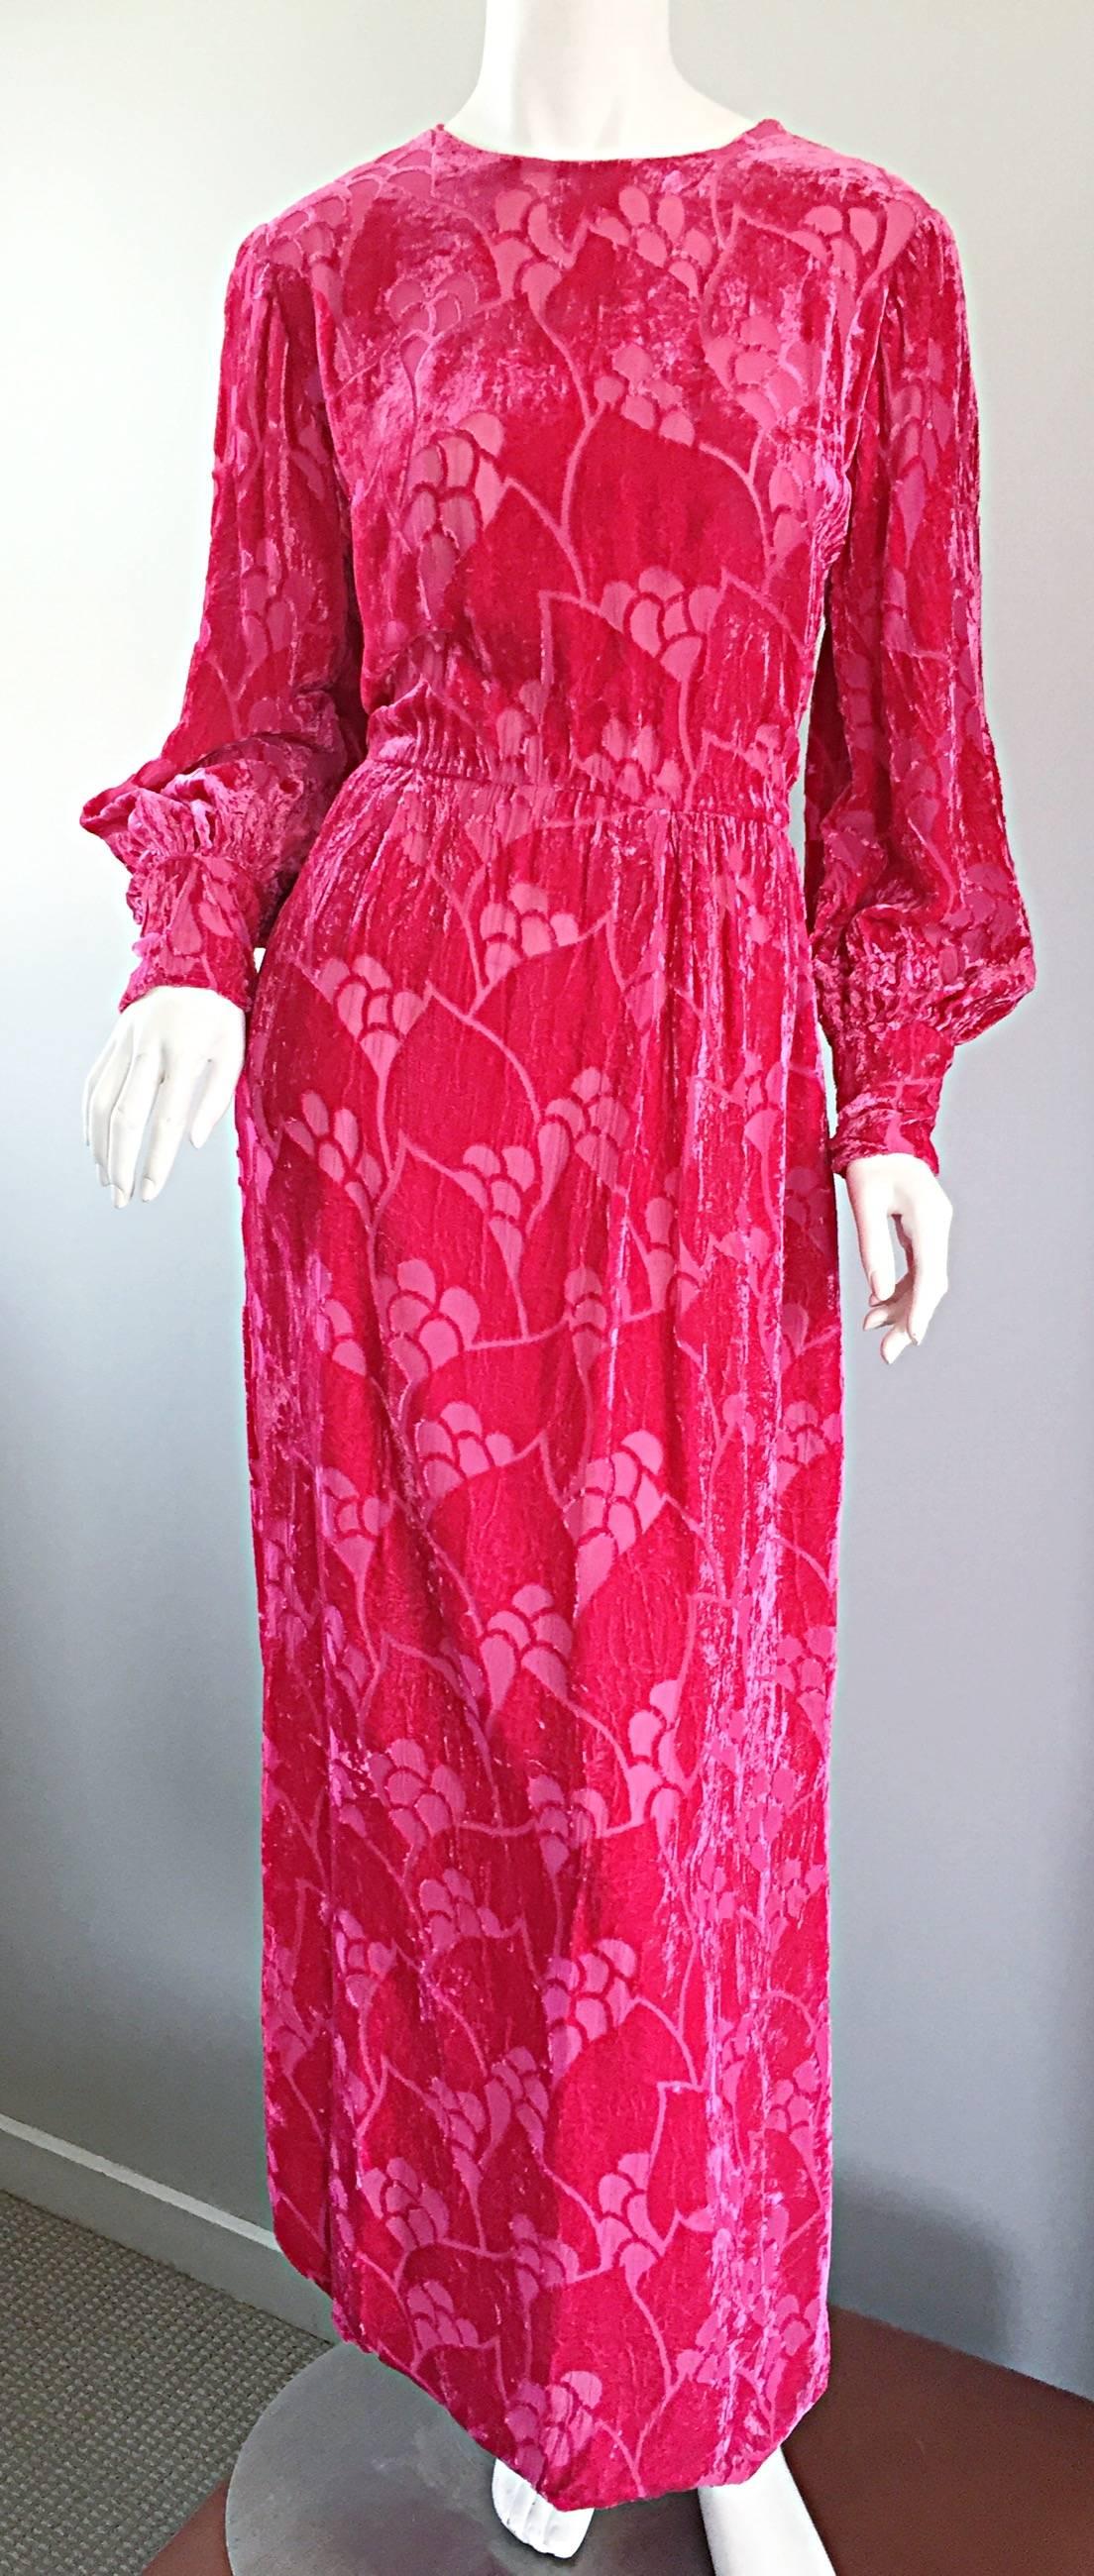 Beautiful vintage early 70s hot pink / fuchsia silk crushed velvet long sleeve gown! Features full bishop sleeves, a fitted bodice, and a breathtaking dramatic skirt that looks incredible with movement! Chic cut-out designs, with chiffon backing.